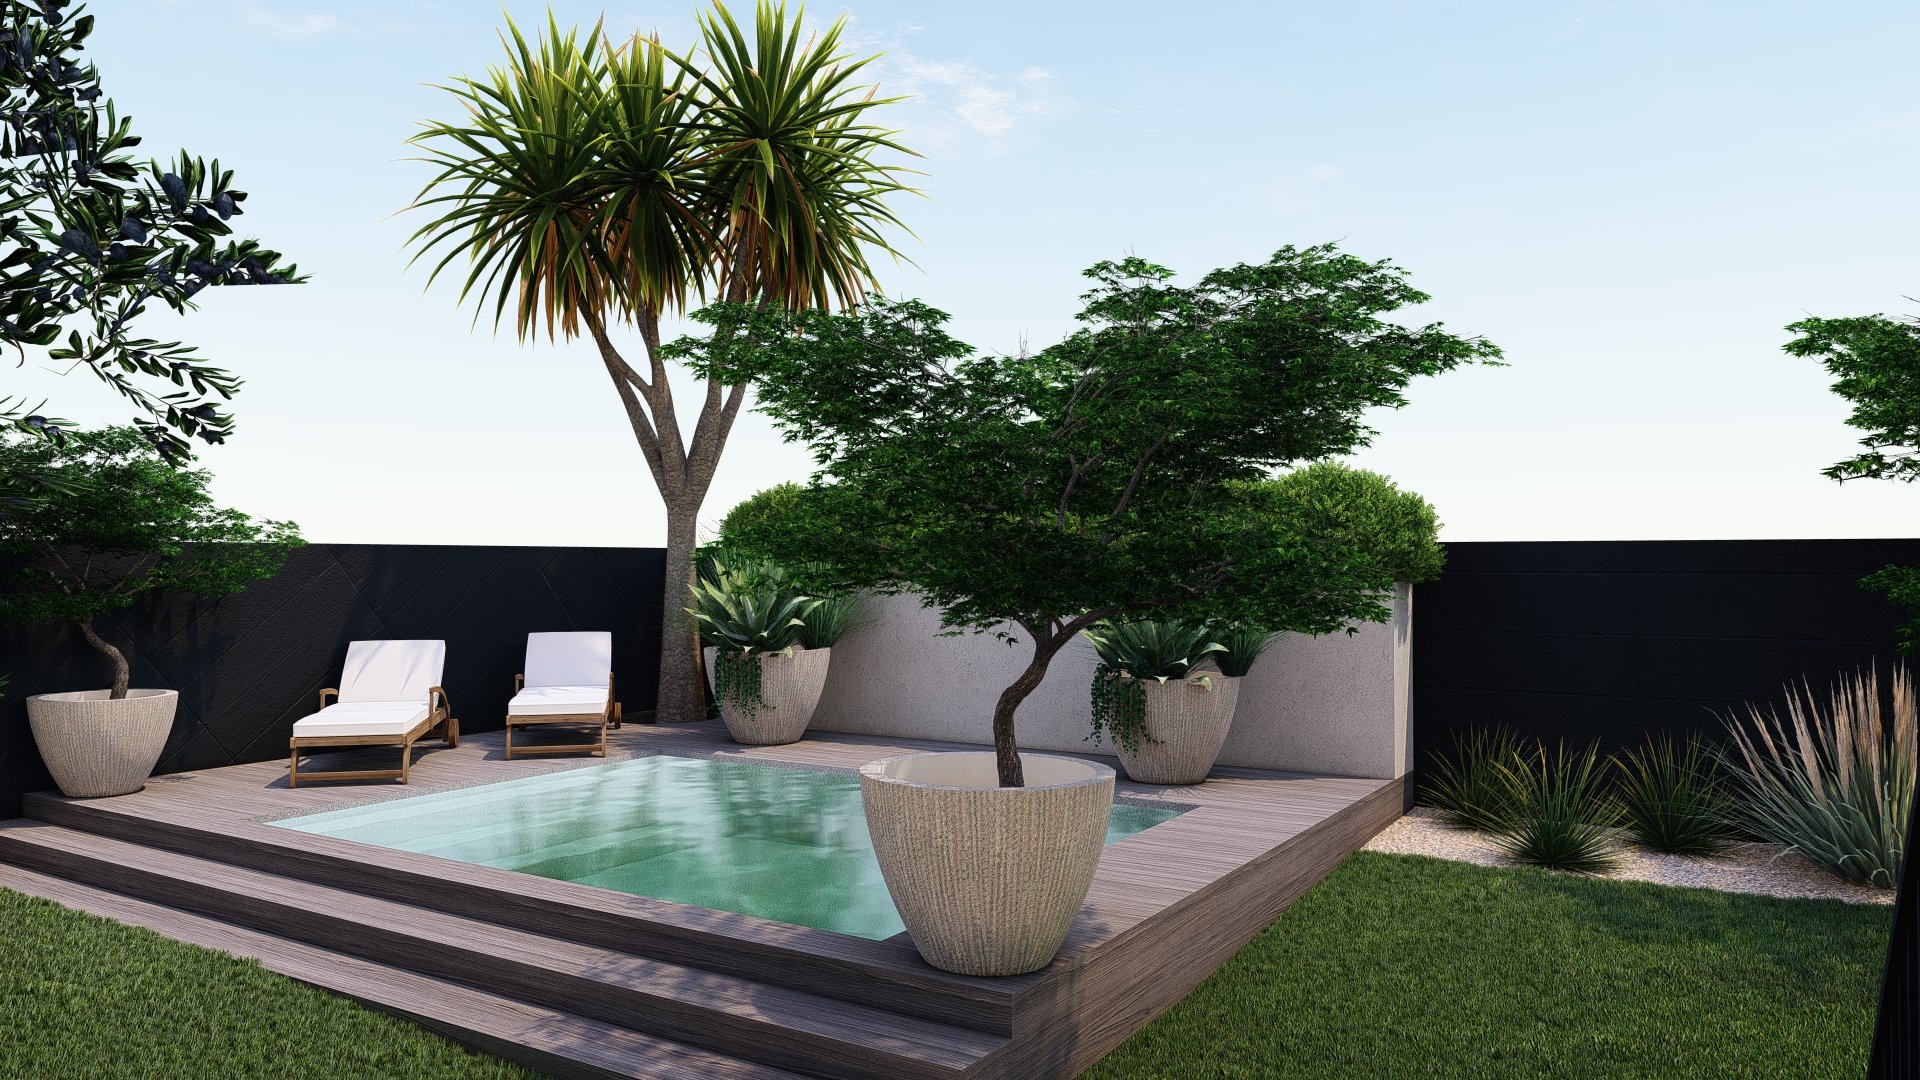 An in-deck plunge pool surrounded by potted plants